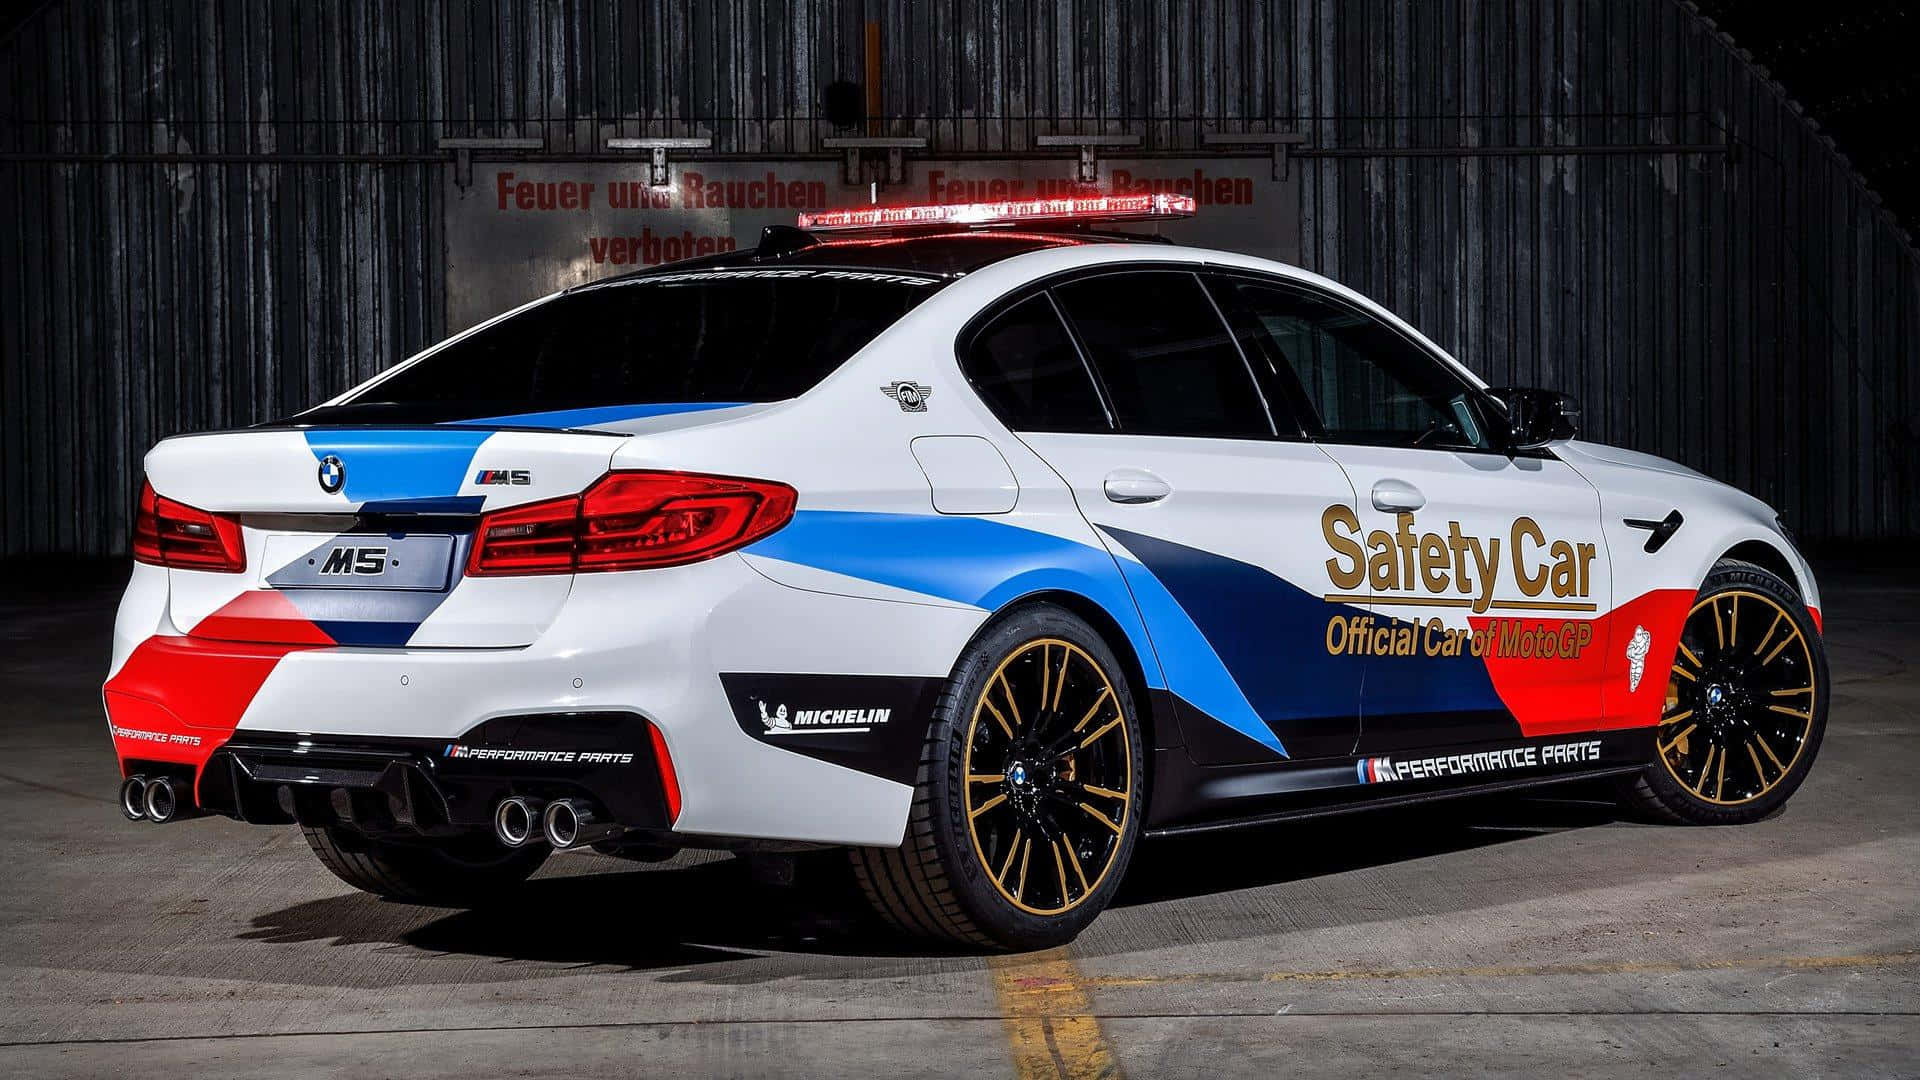 High-speed safety car on the track Wallpaper